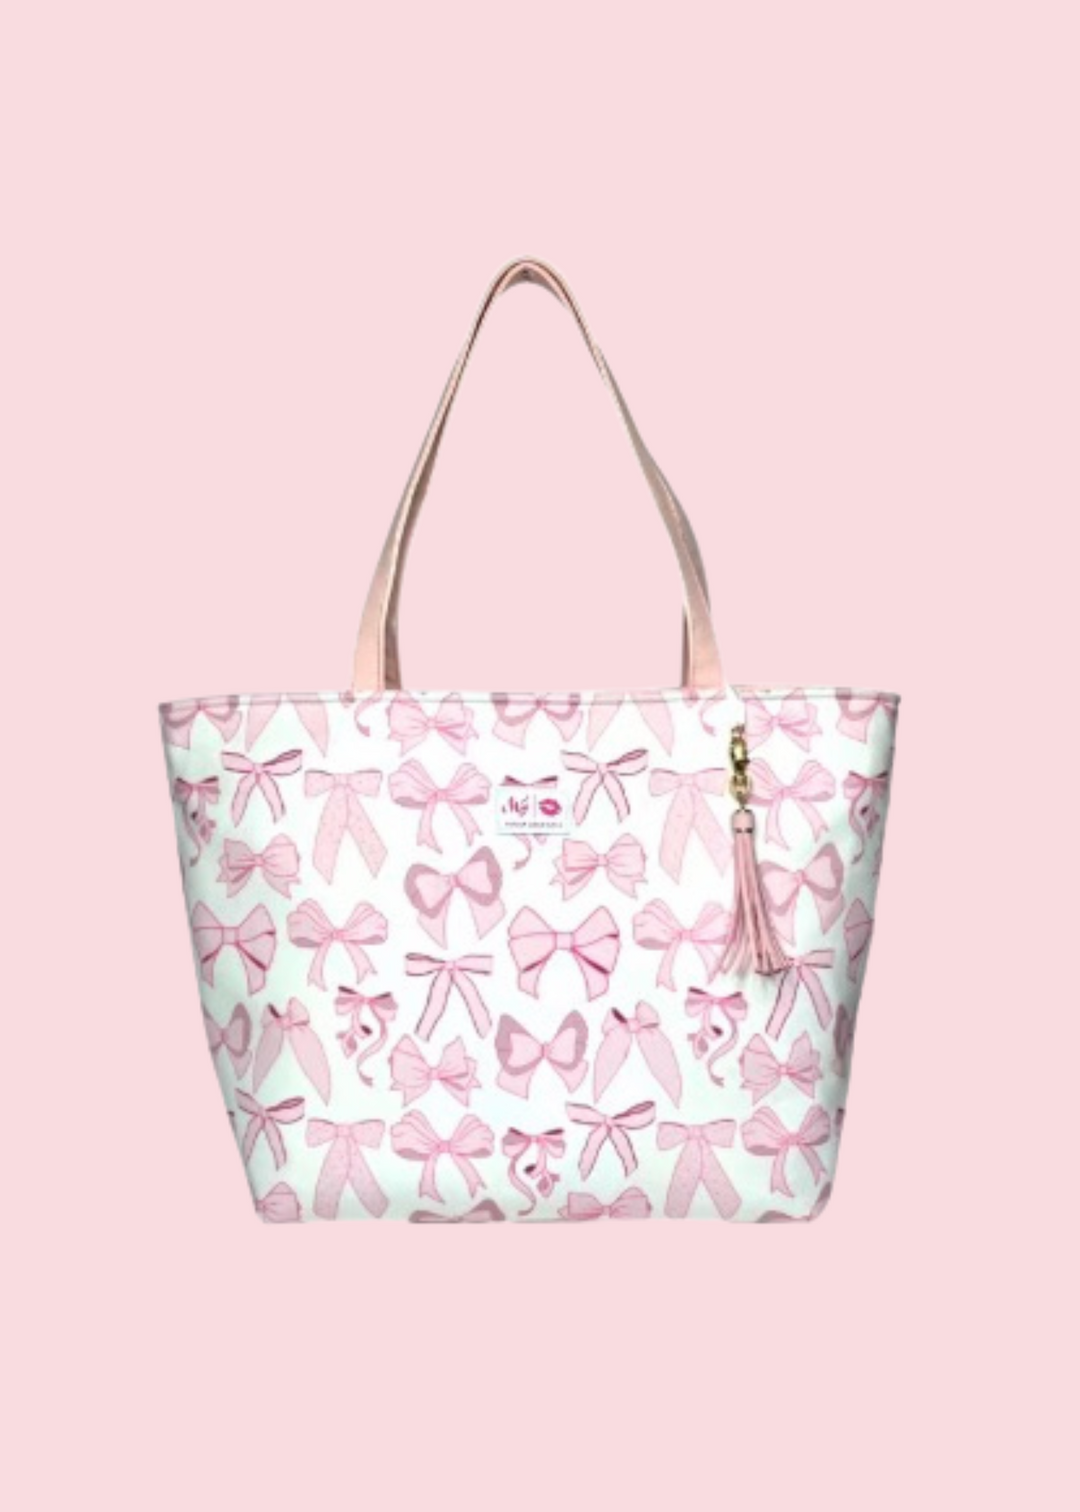 Makeup Junkie Bags - Bow Babe Tote [Pre-Order]